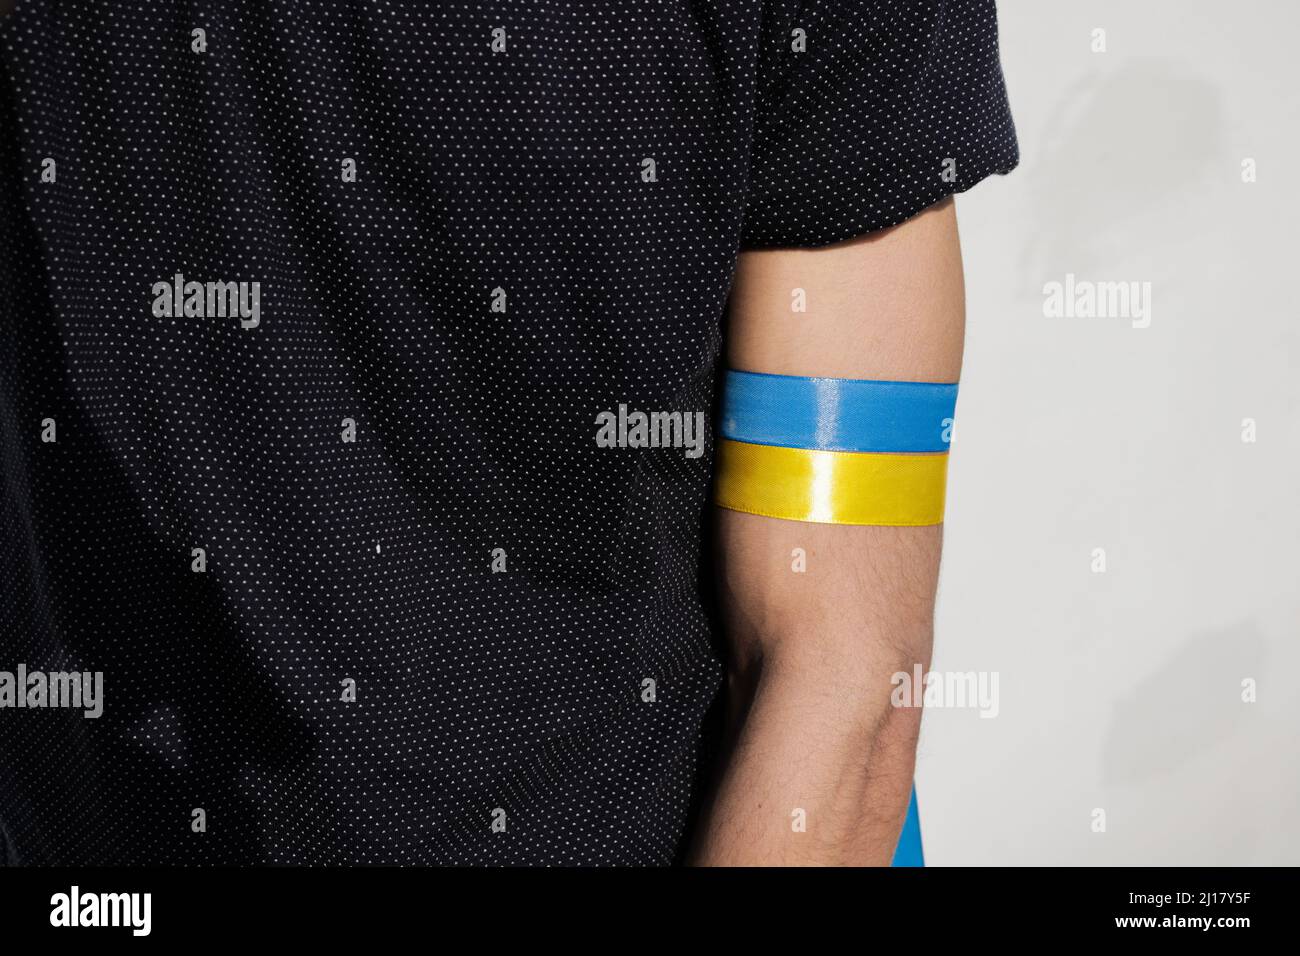 Ukrainian flag color ribbon tied on arm in support of Ukraine. Stock Photo